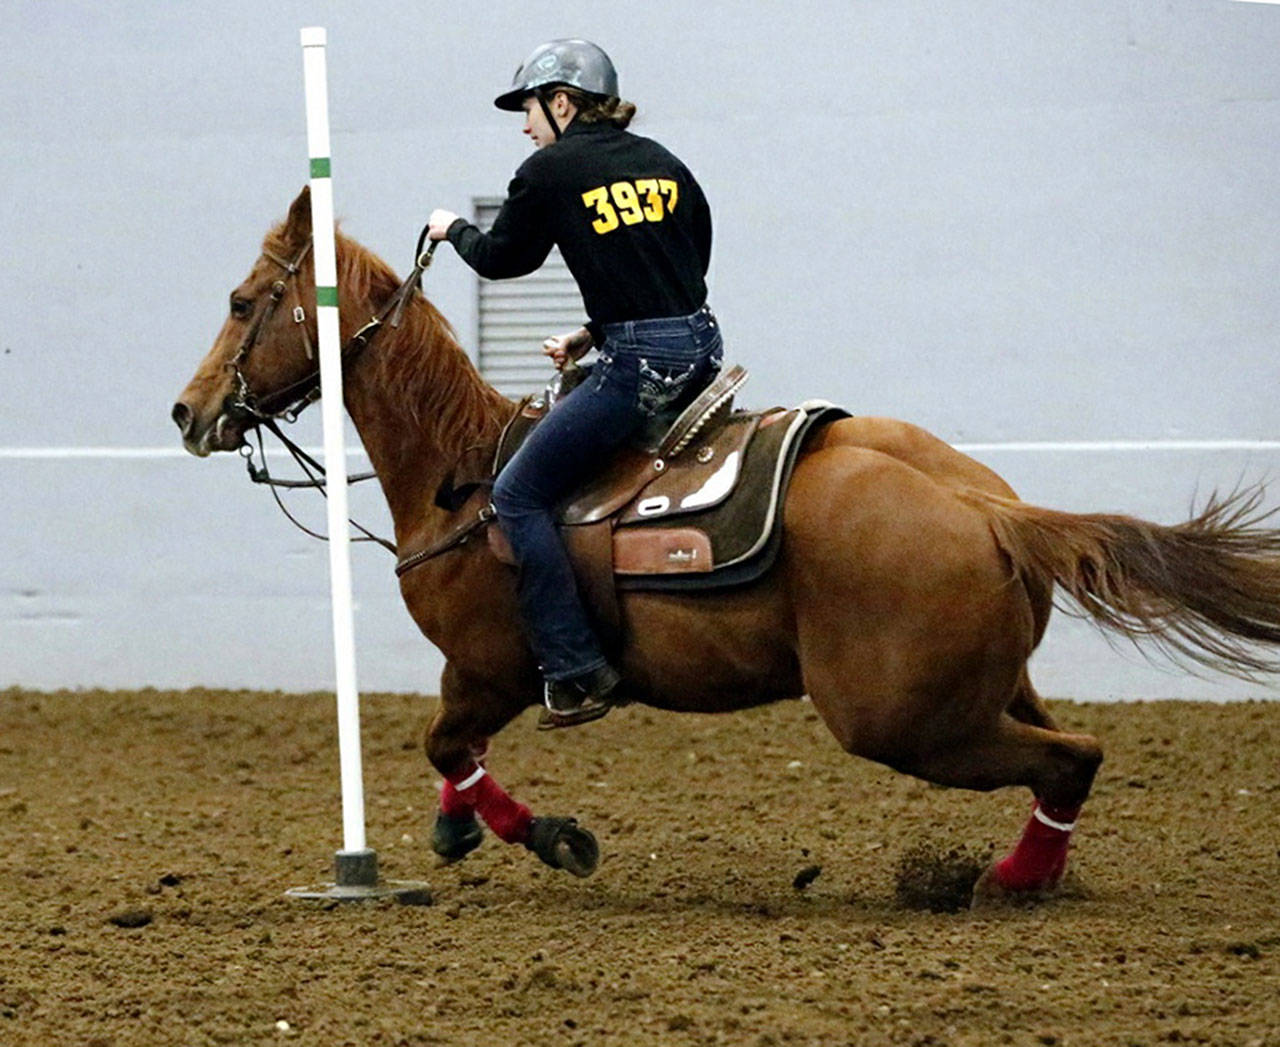 Enumclaw’s Emma Schmidt on the way to a district record in pole bending. Contributed photo.